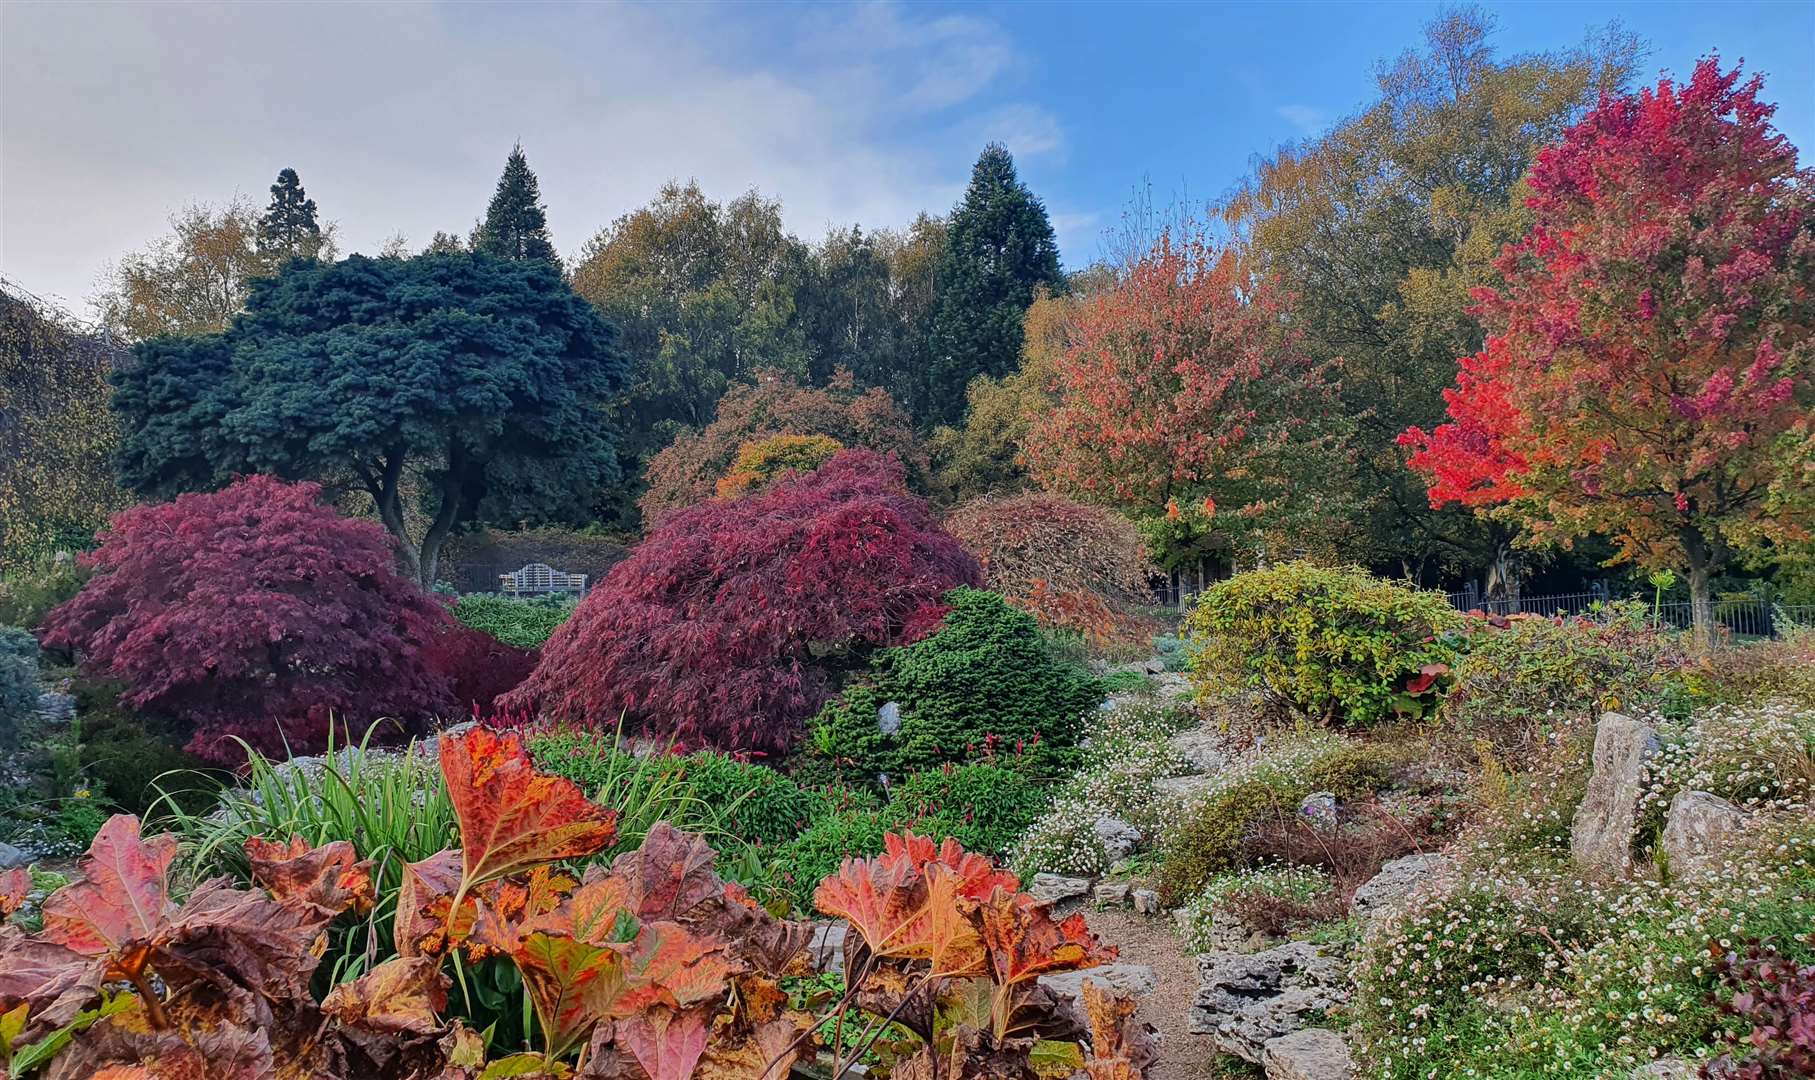 Enjoy the autumnal colours at Emmetts Garden. Picture: National Trust Images / Nick Dougan